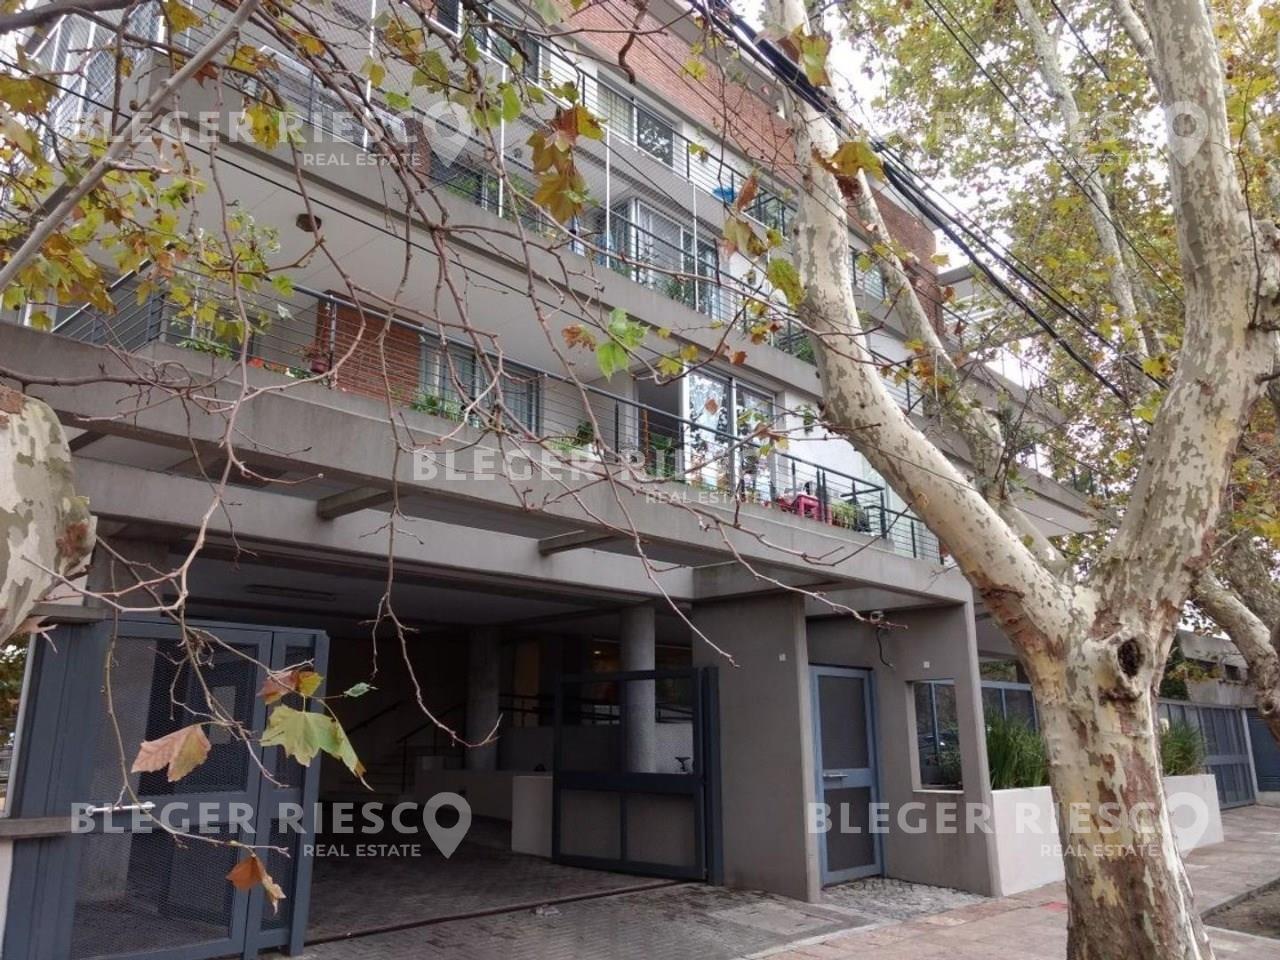 #3994879 | Temporary Rental | Apartment | Tigre (Bleger-Riesco Real State)